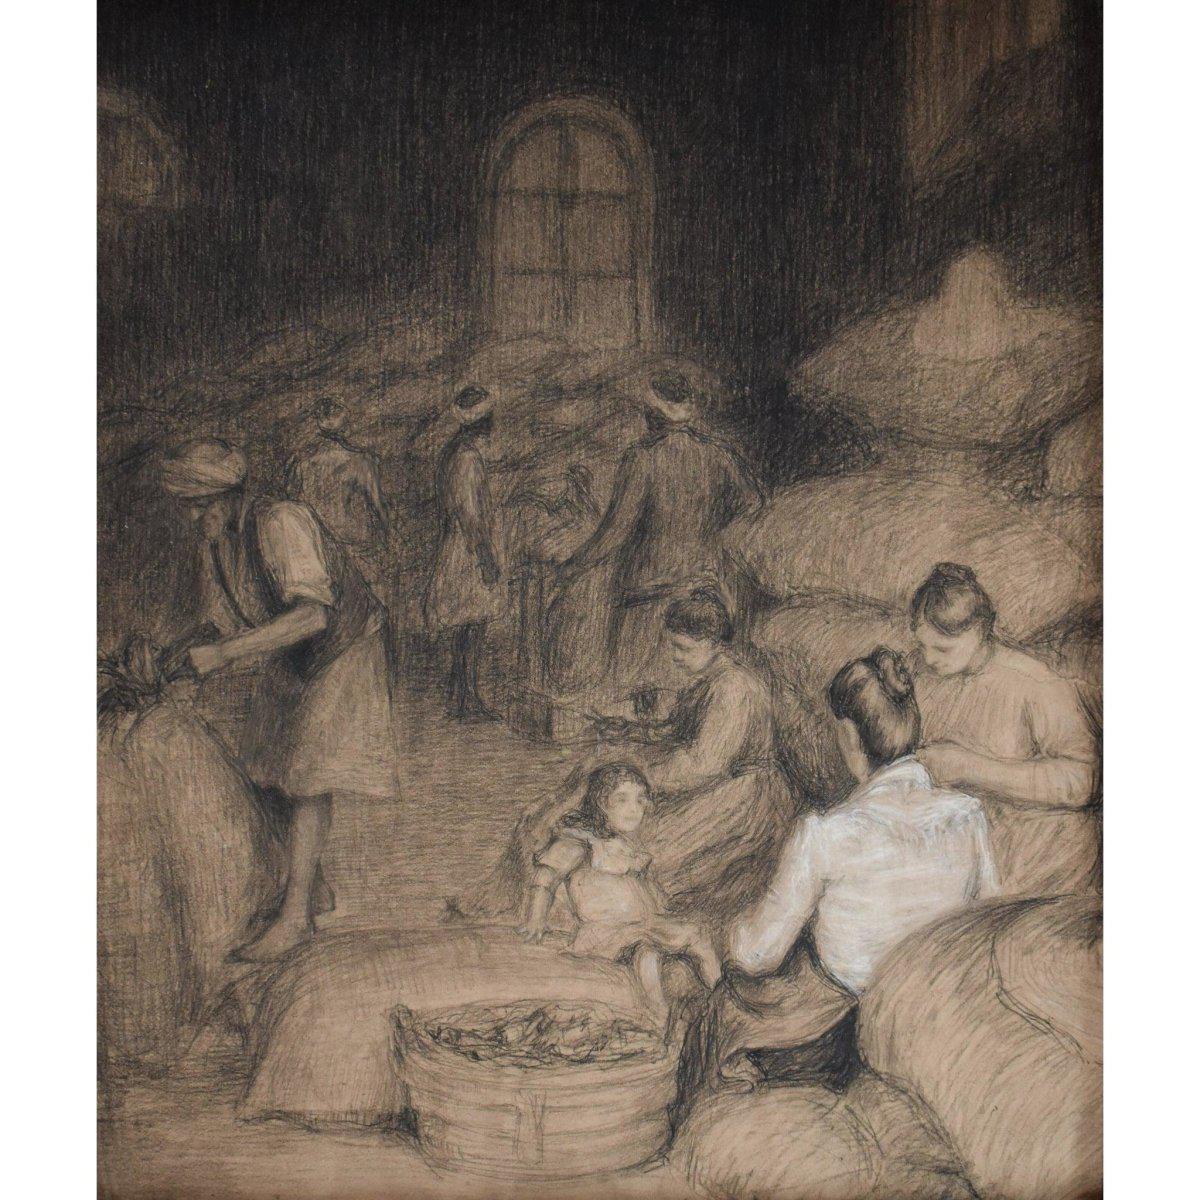 Antique scene drawing painting workers warehouse circa 1910 by Edouard Pannetier for sale at Winckelmann Gallery